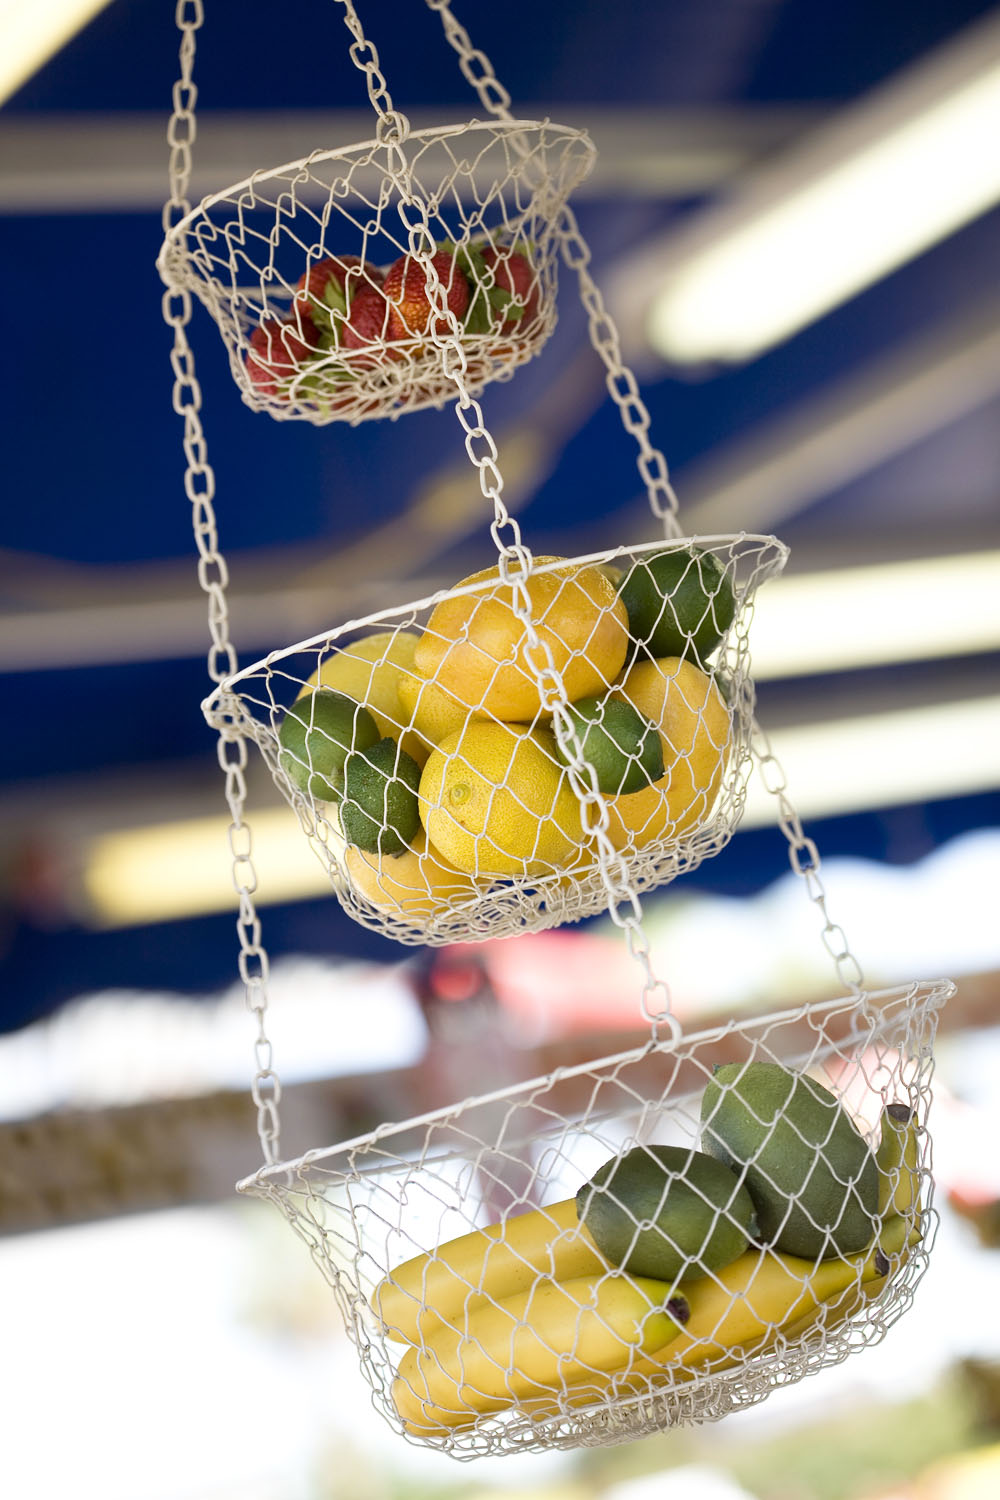 A three-tiered mesh hanging fruit basket filled with bananas, limes, lemons and strawberries